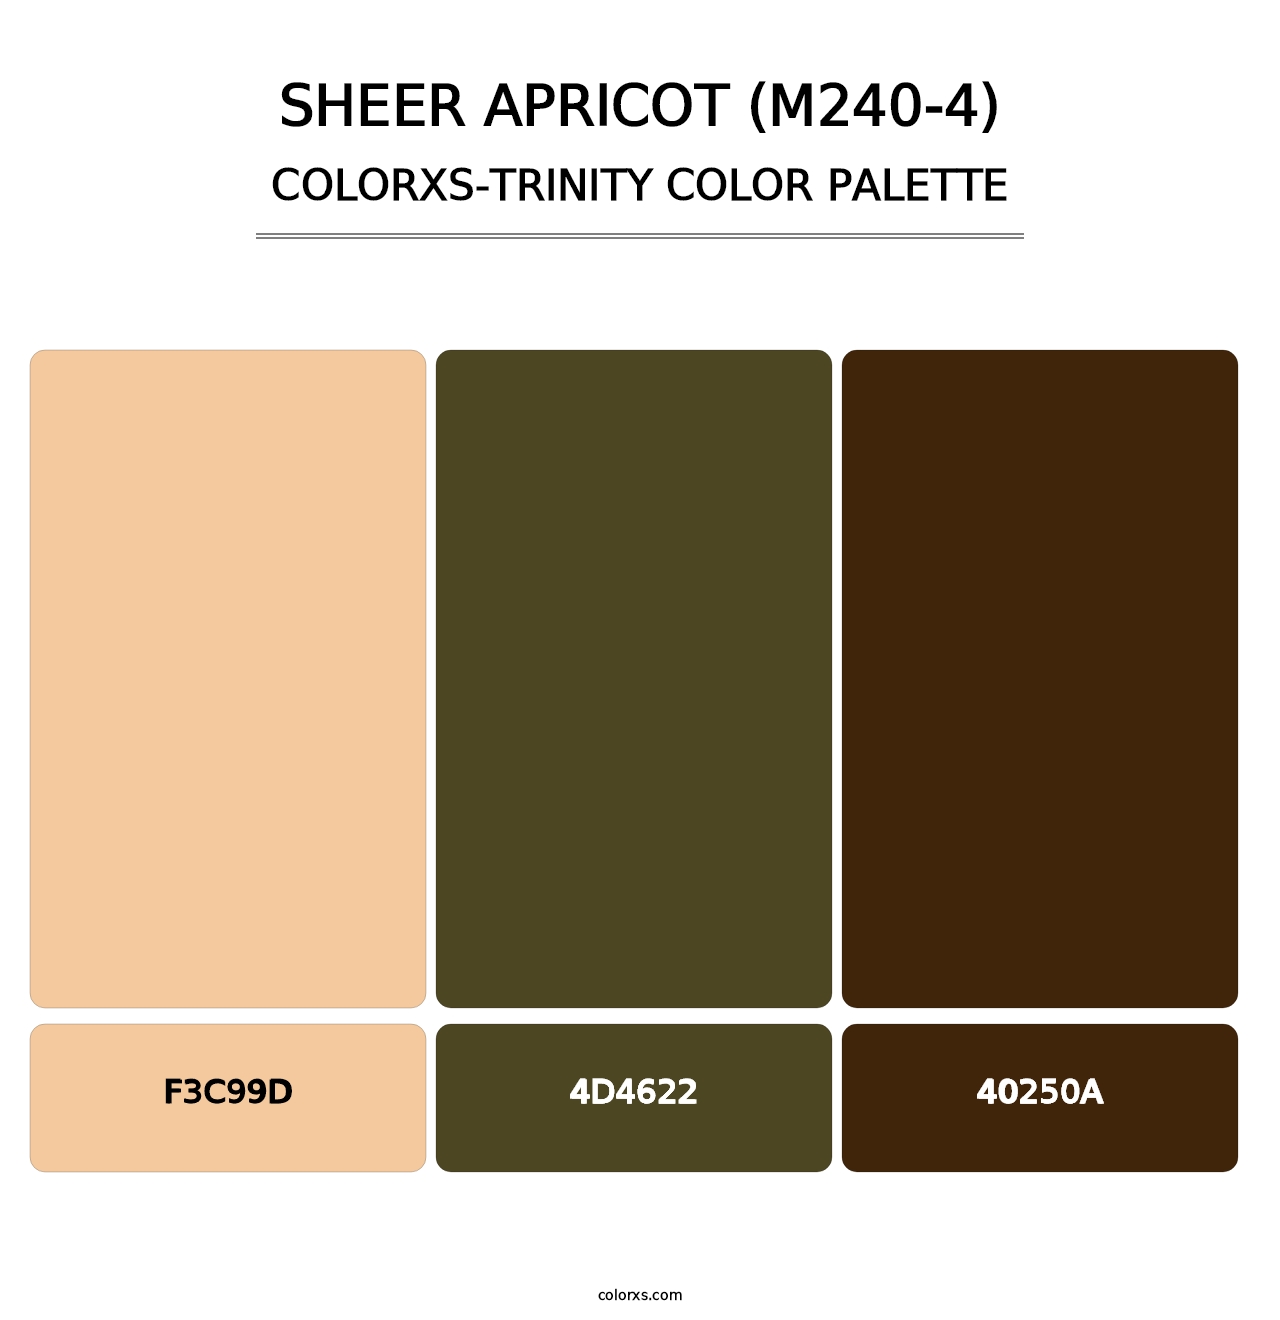 Sheer Apricot (M240-4) - Colorxs Trinity Palette